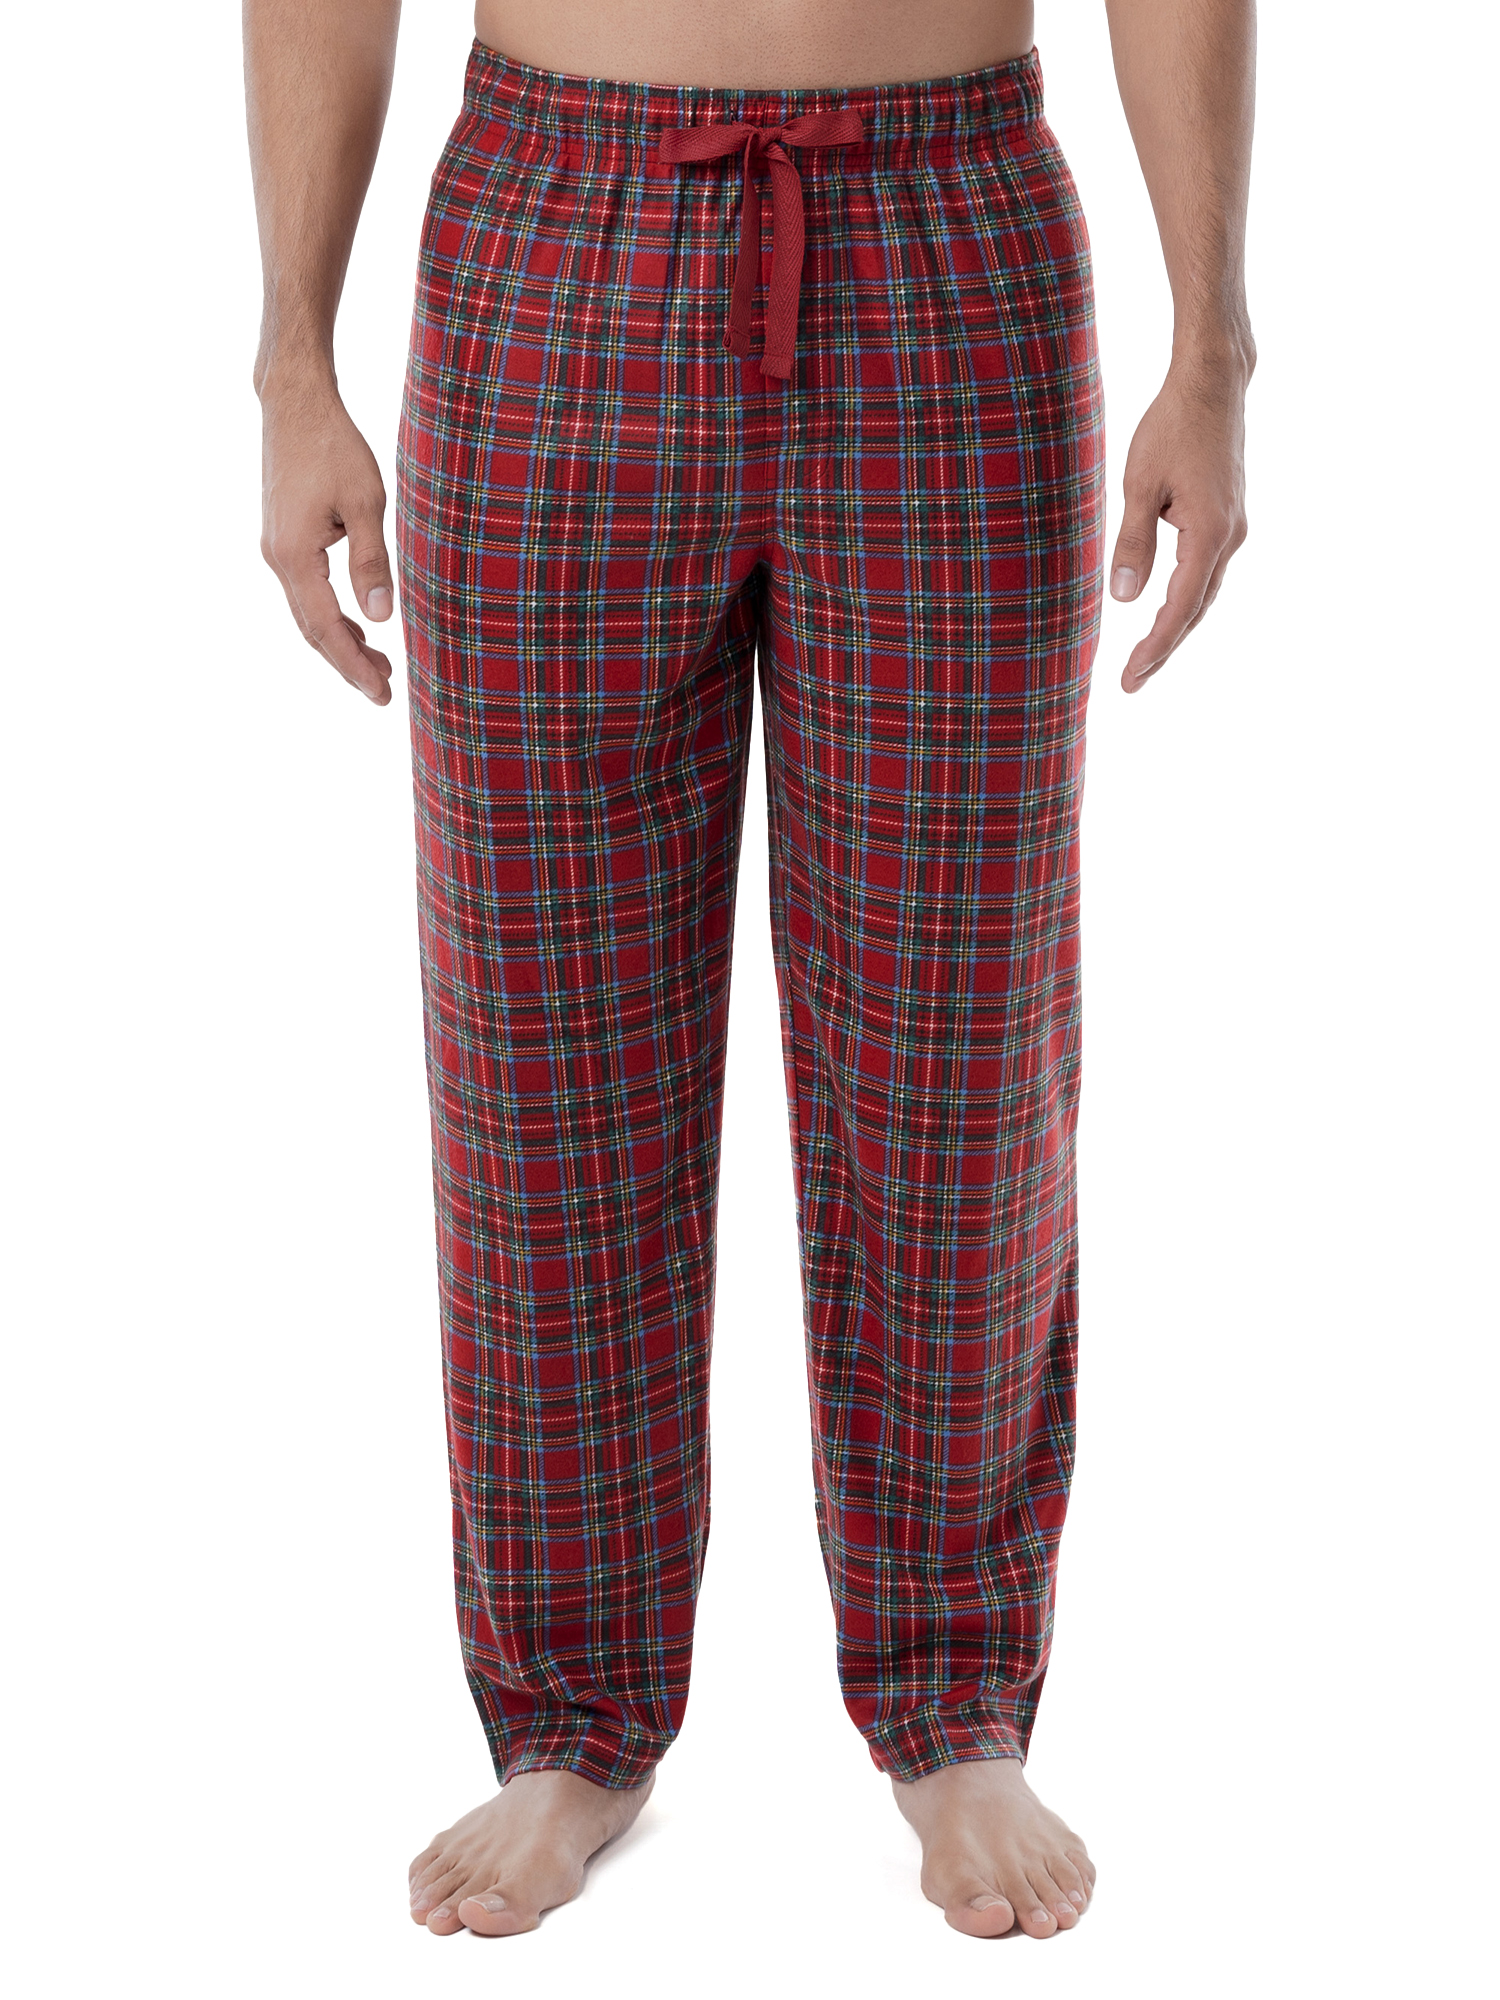 Fruit of the Loom Men's Holiday and Plaid Print Soft Microfleece Pajama Pant 2-Pack Bundle - image 13 of 15